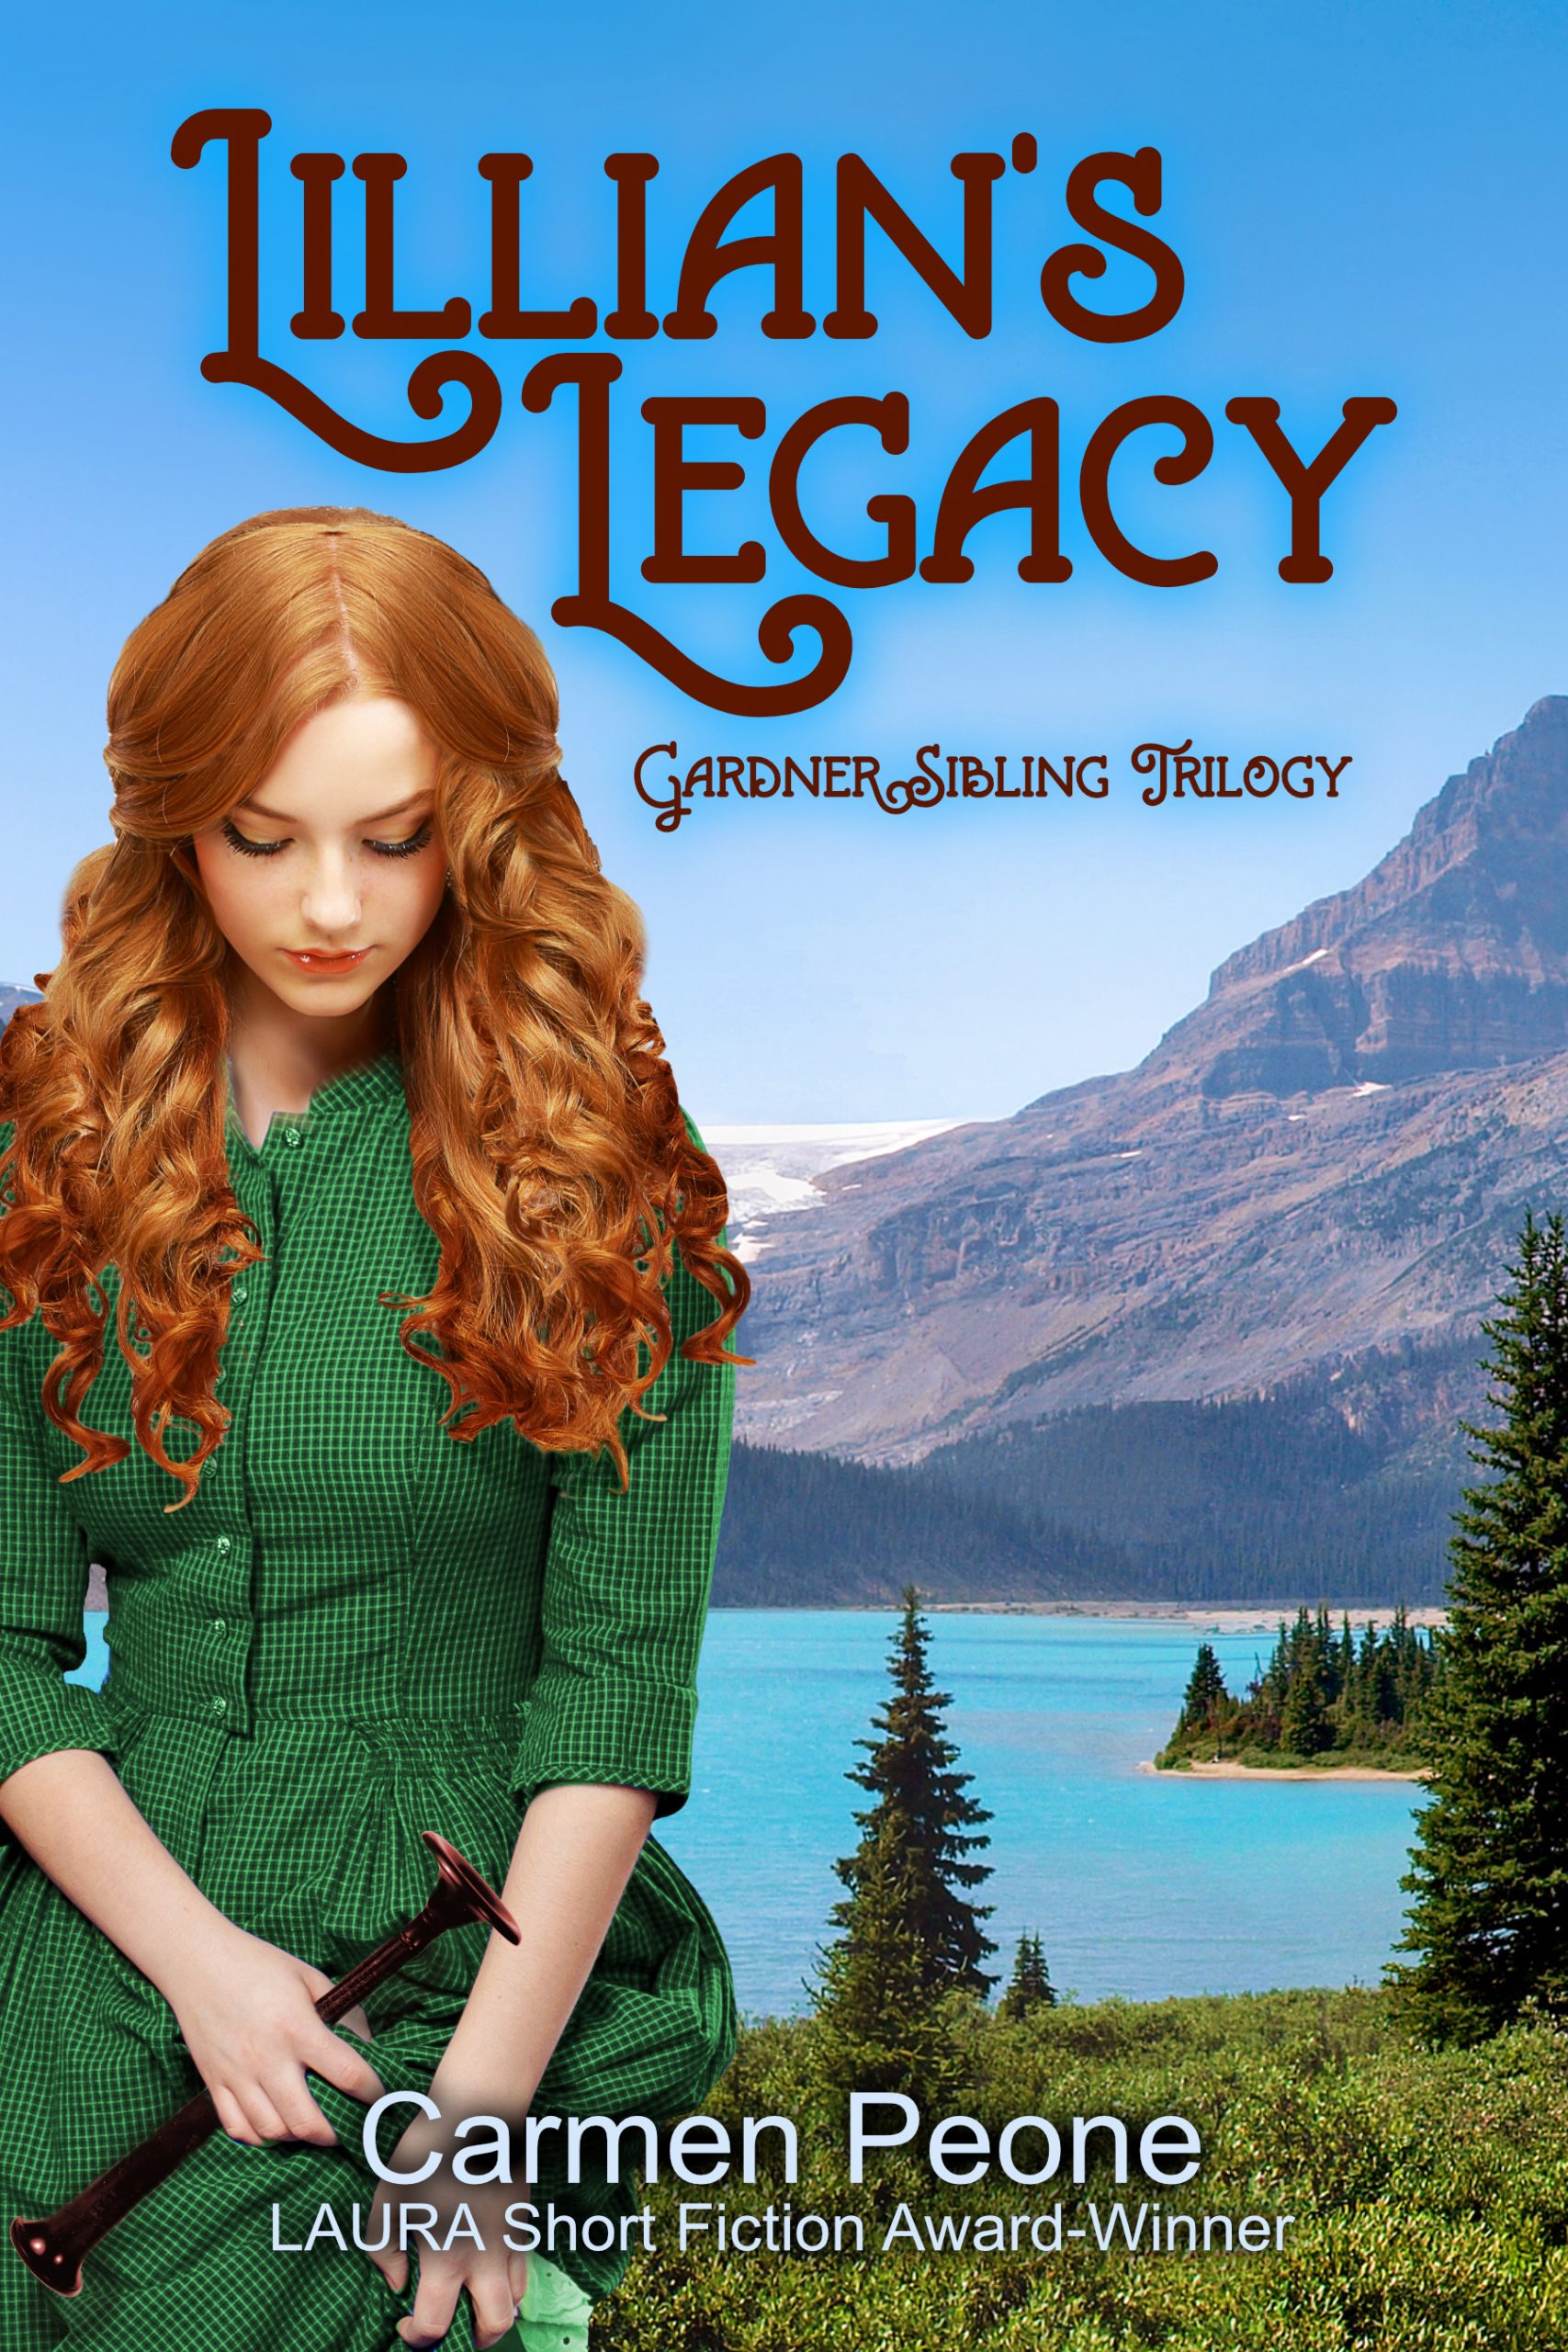 Lillian’s Legacy Pre-launch Interview with John Williams